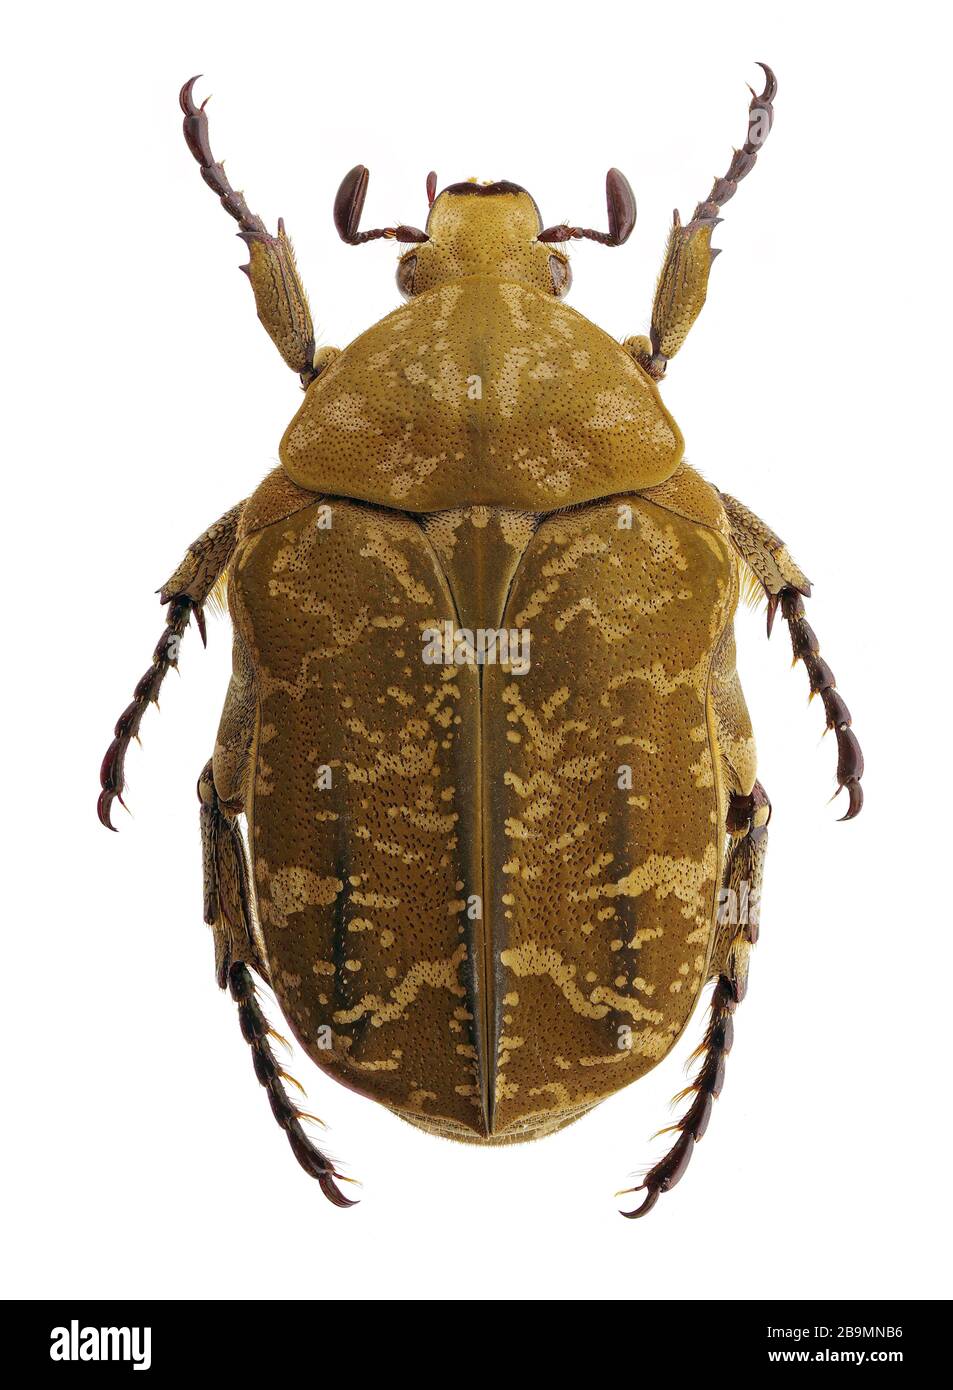 isolated specimen of Protaetia culta, a flower beetle from Taiwan and Japan, on white background Stock Photo